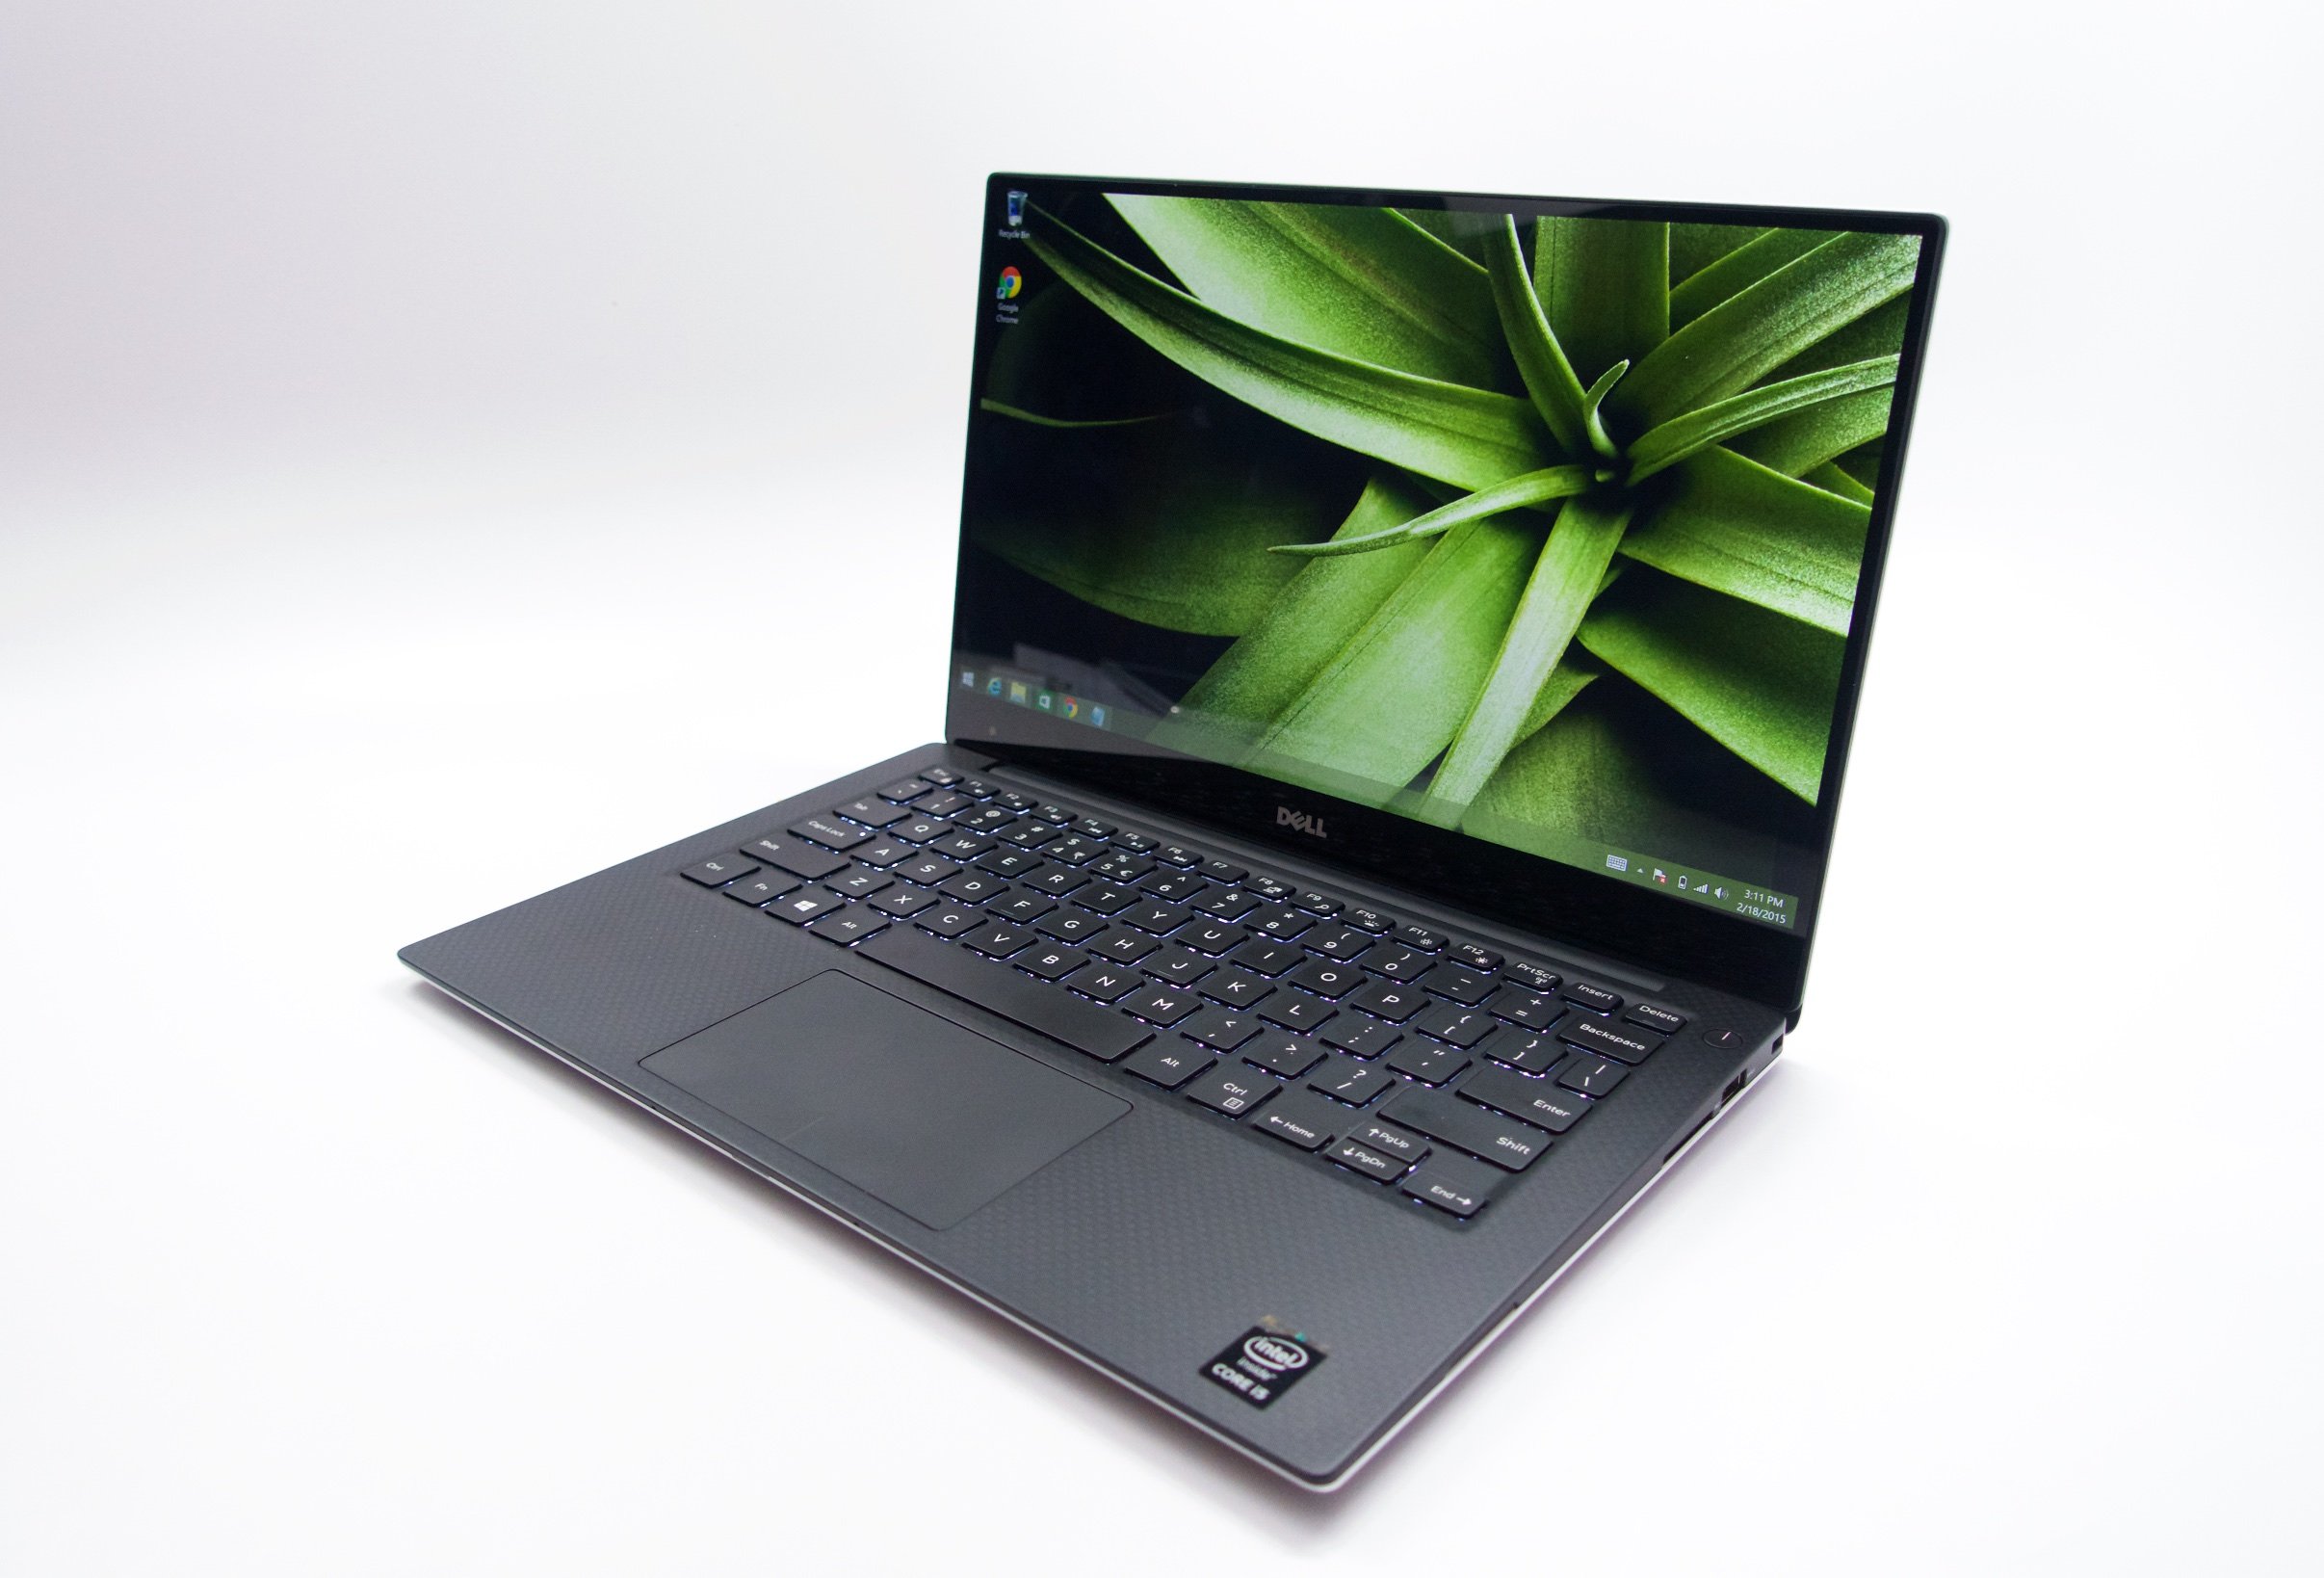 The Dell XPS 13 2015 display includes a QHD+ option that looks amazing.